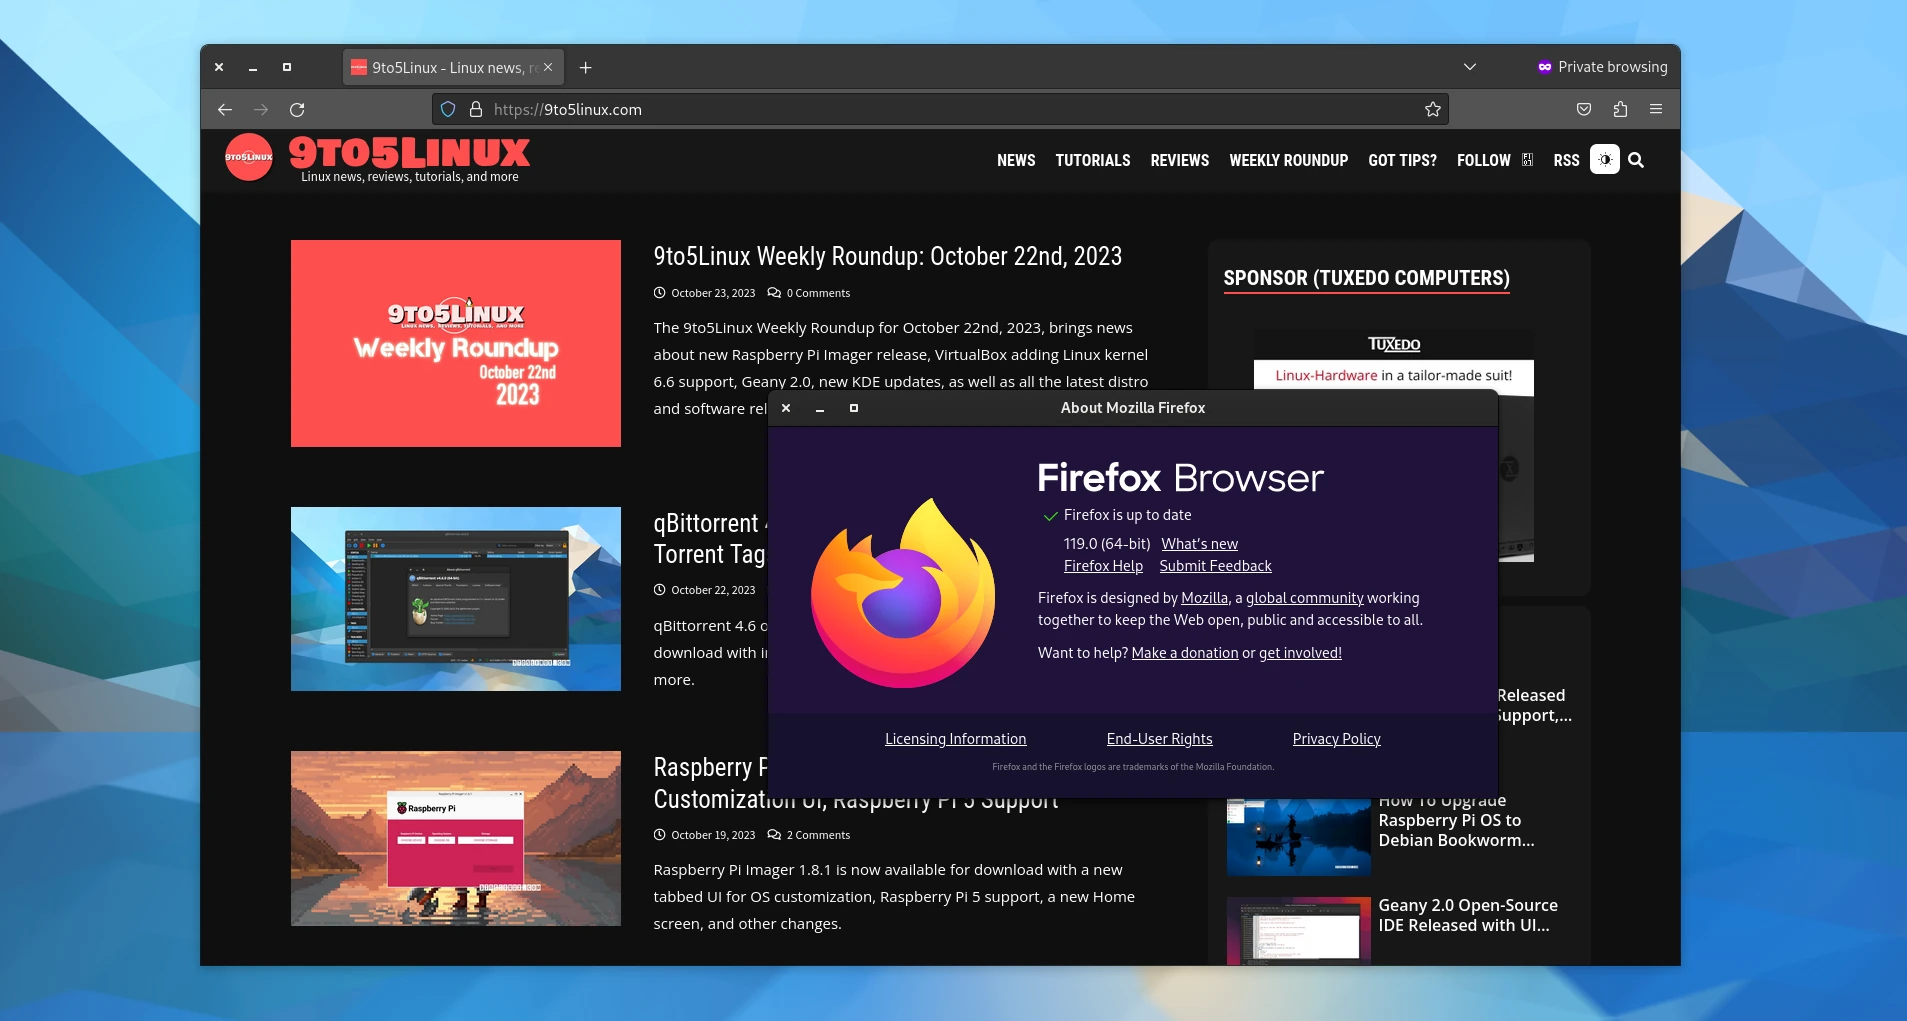 Mozilla Firefox offers new features in the security and privacy of your  service